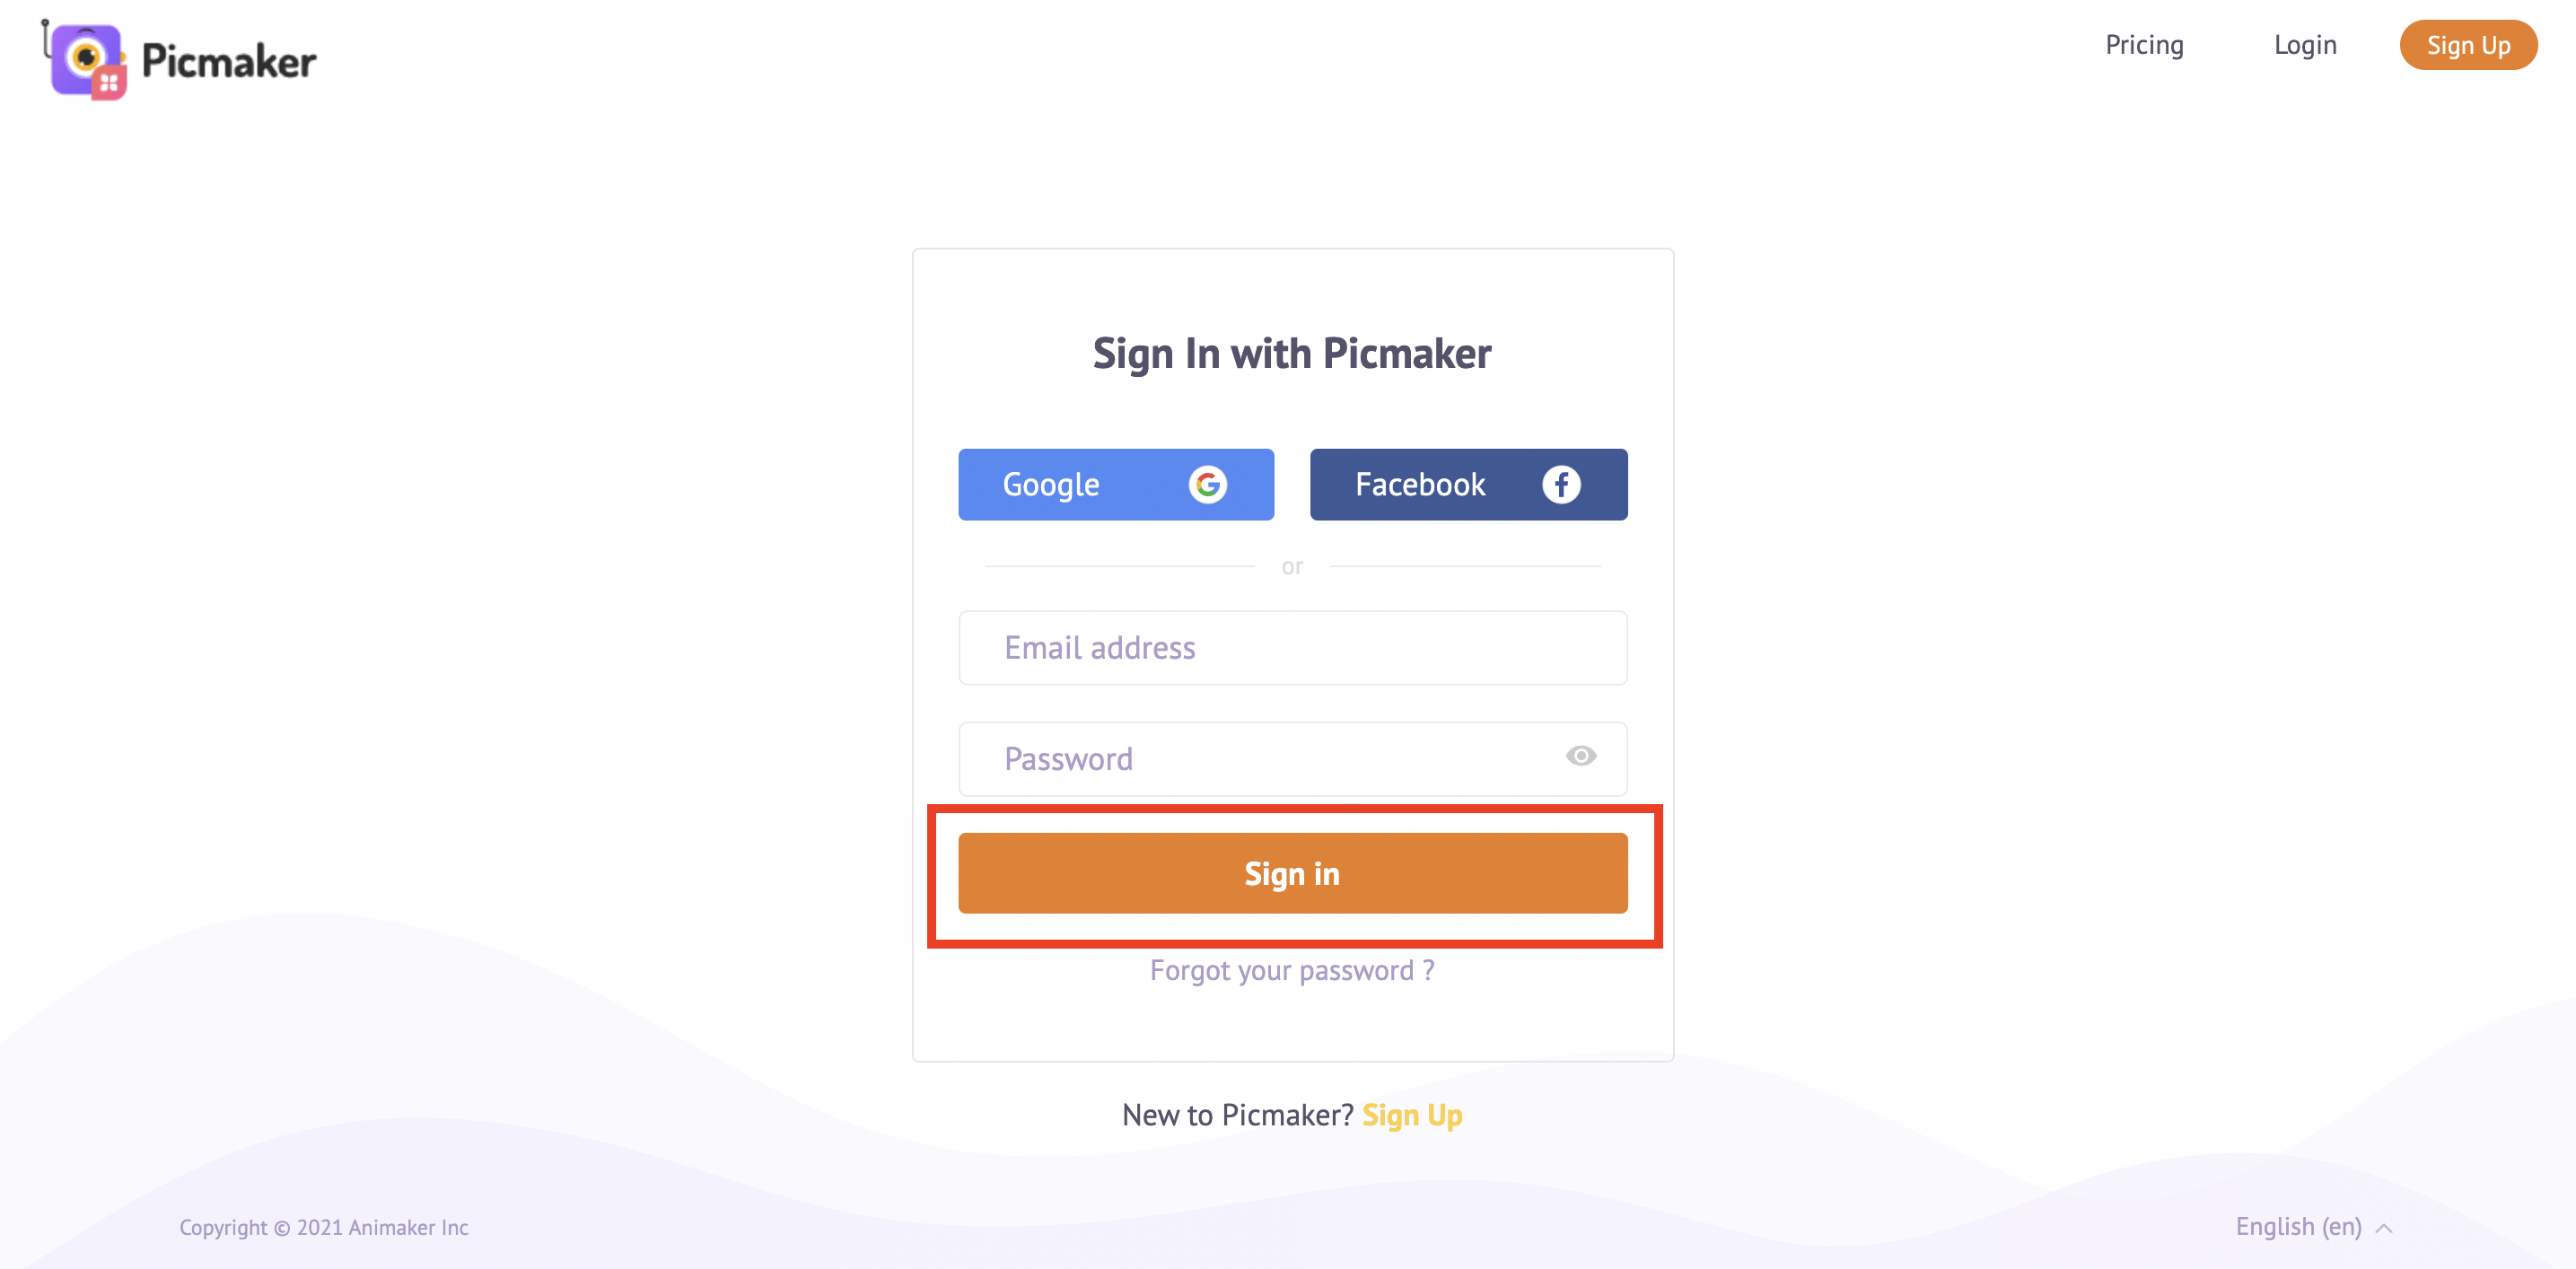 Sign in with Picmaker